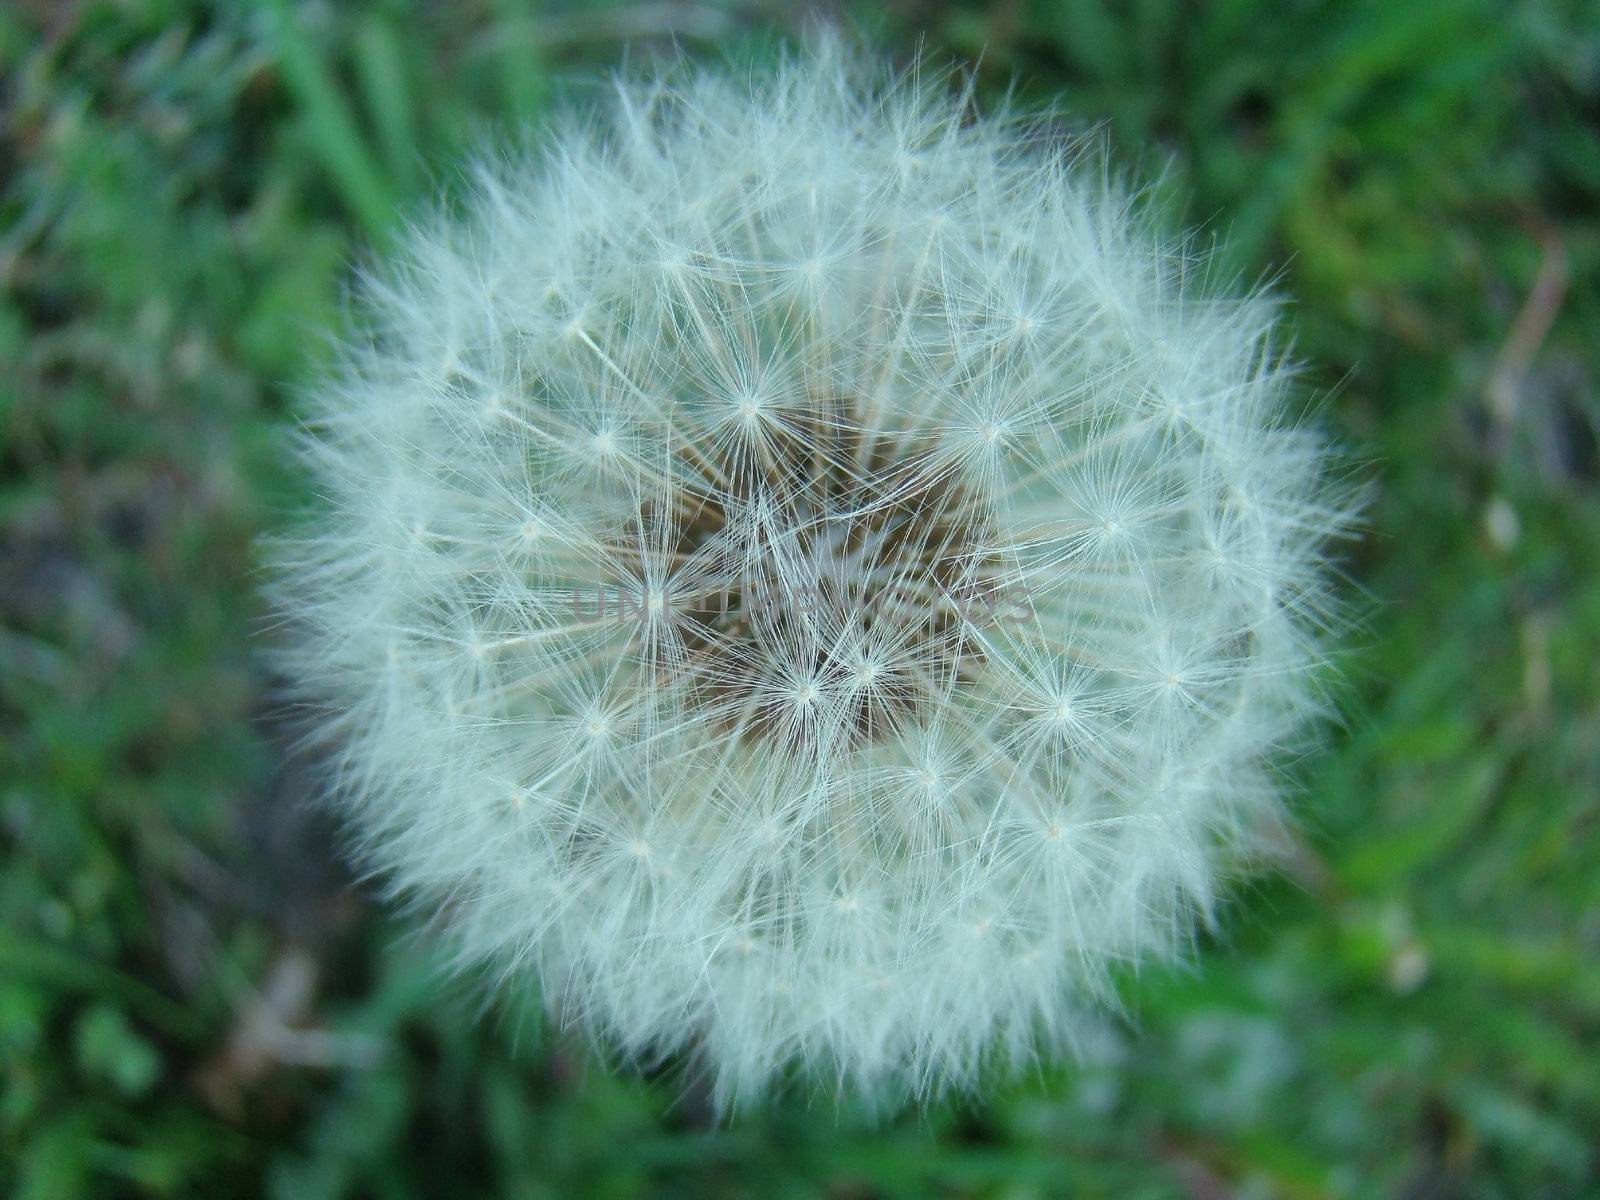 Close up dandilion puffball by hicster